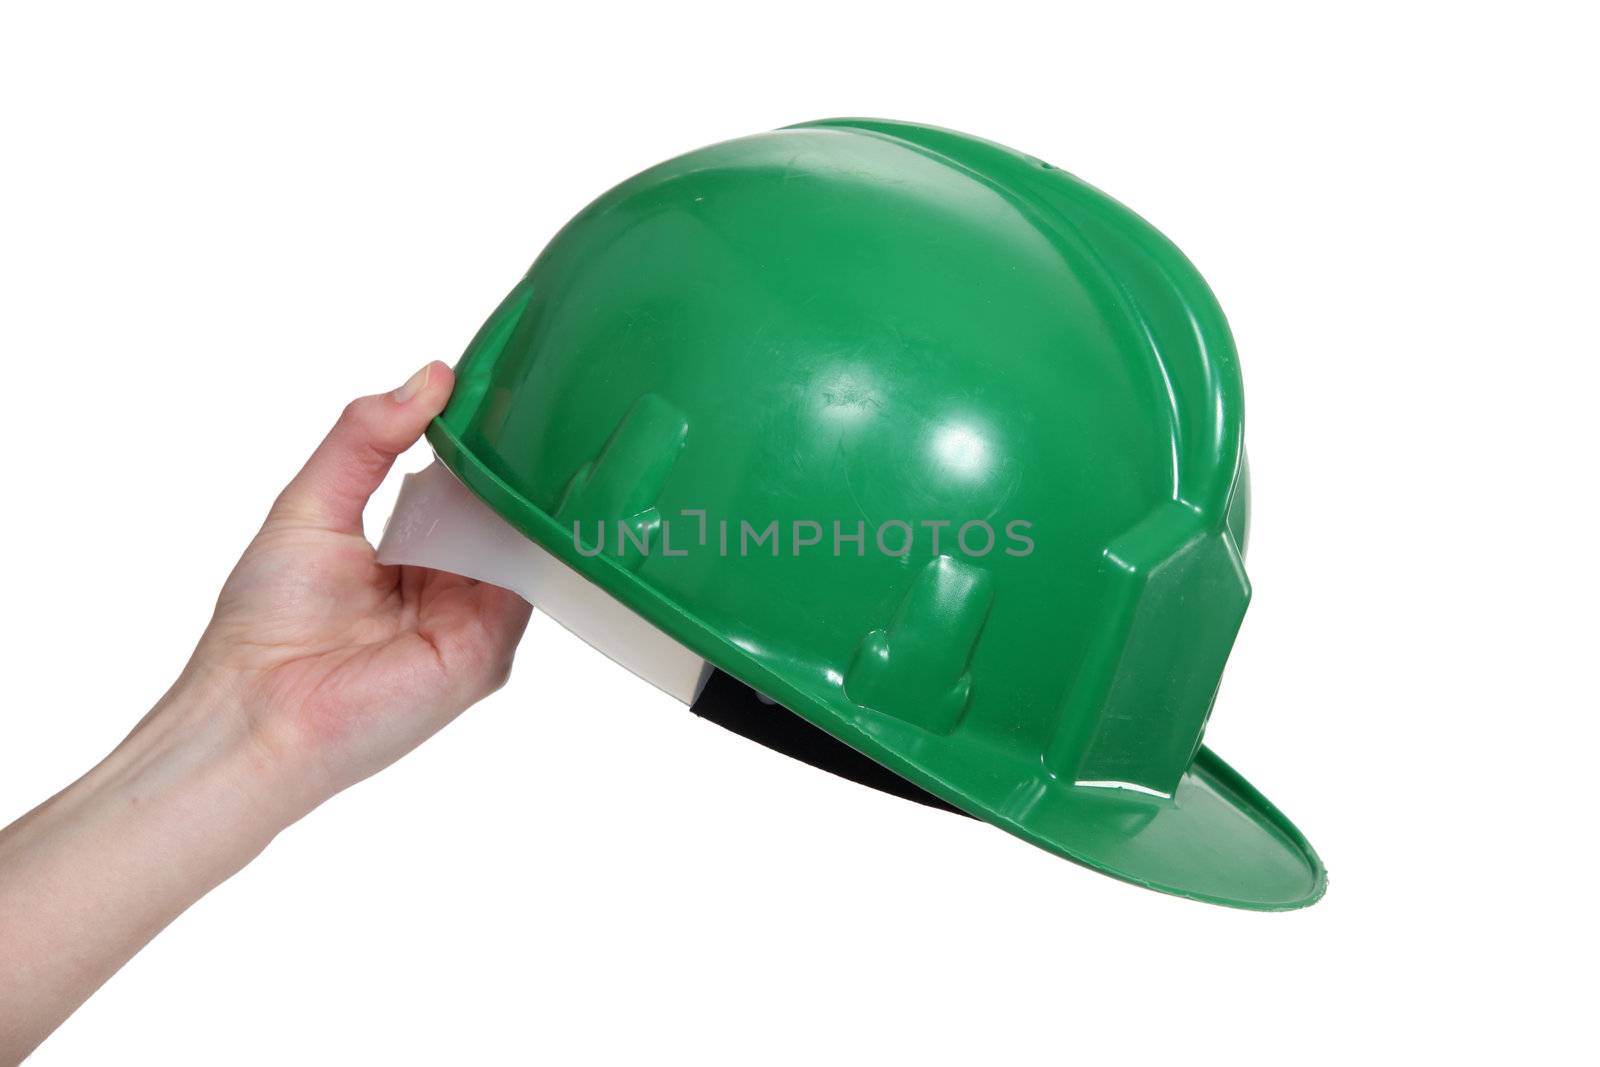 A hard hat by phovoir